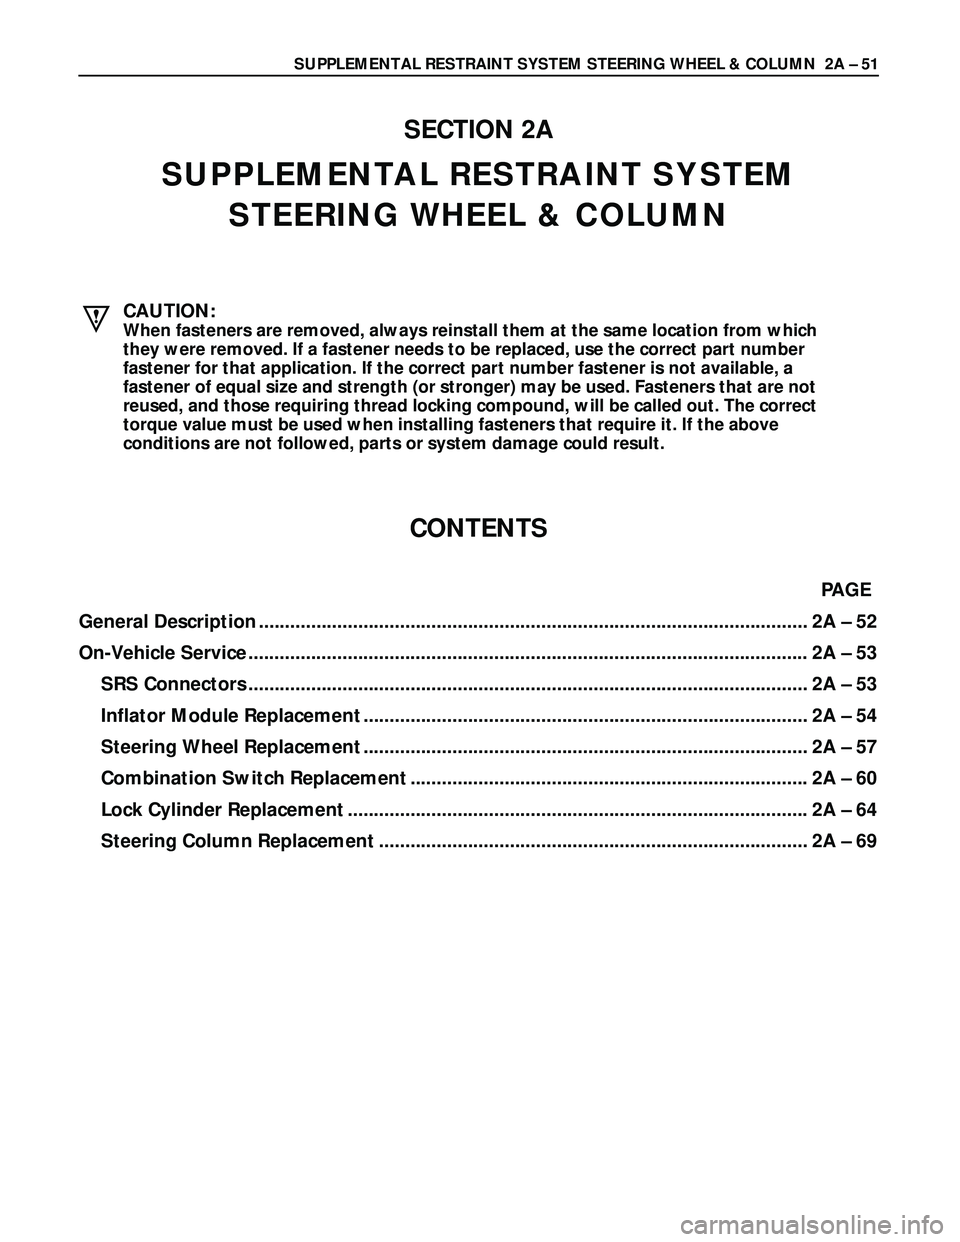 ISUZU TROOPER 1998  Service Repair Manual SUPPLEMENTAL RESTRAINT SYSTEM STEERING WHEEL & COLUMN  2A – 51
SECTION 2A
SUPPLEMENTAL RESTRAINT SYSTEM
STEERING WHEEL & COLUMN
CAUTION:
When fasteners are removed, always reinstall them at the same